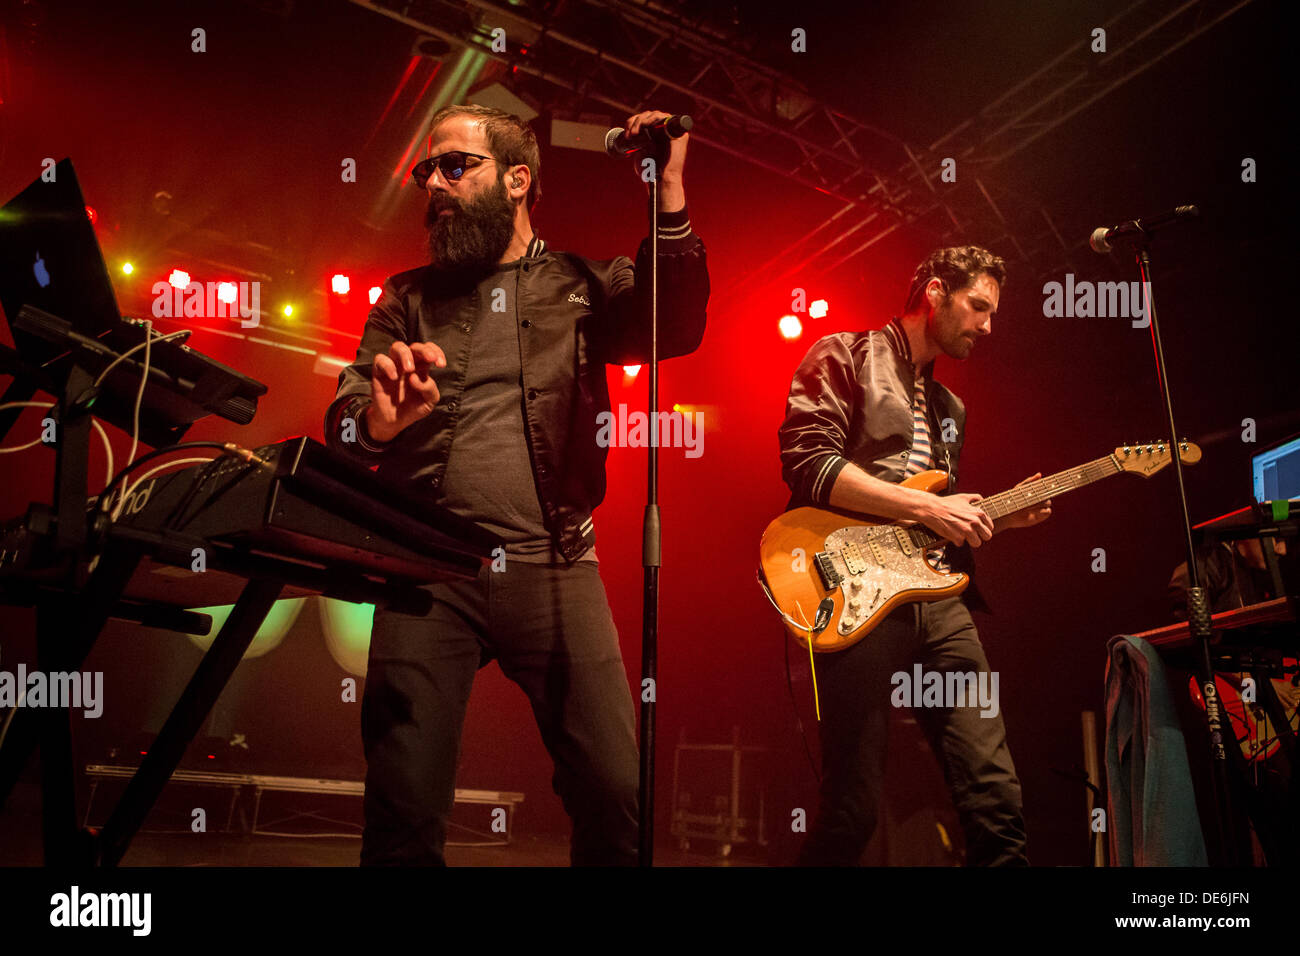 Milan Italy. 11th September 2013. The American indie pop duo CAPITAL CITIES performs live at Magazzini Generali © Rodolfo Sassano/Alamy Live News Stock Photo